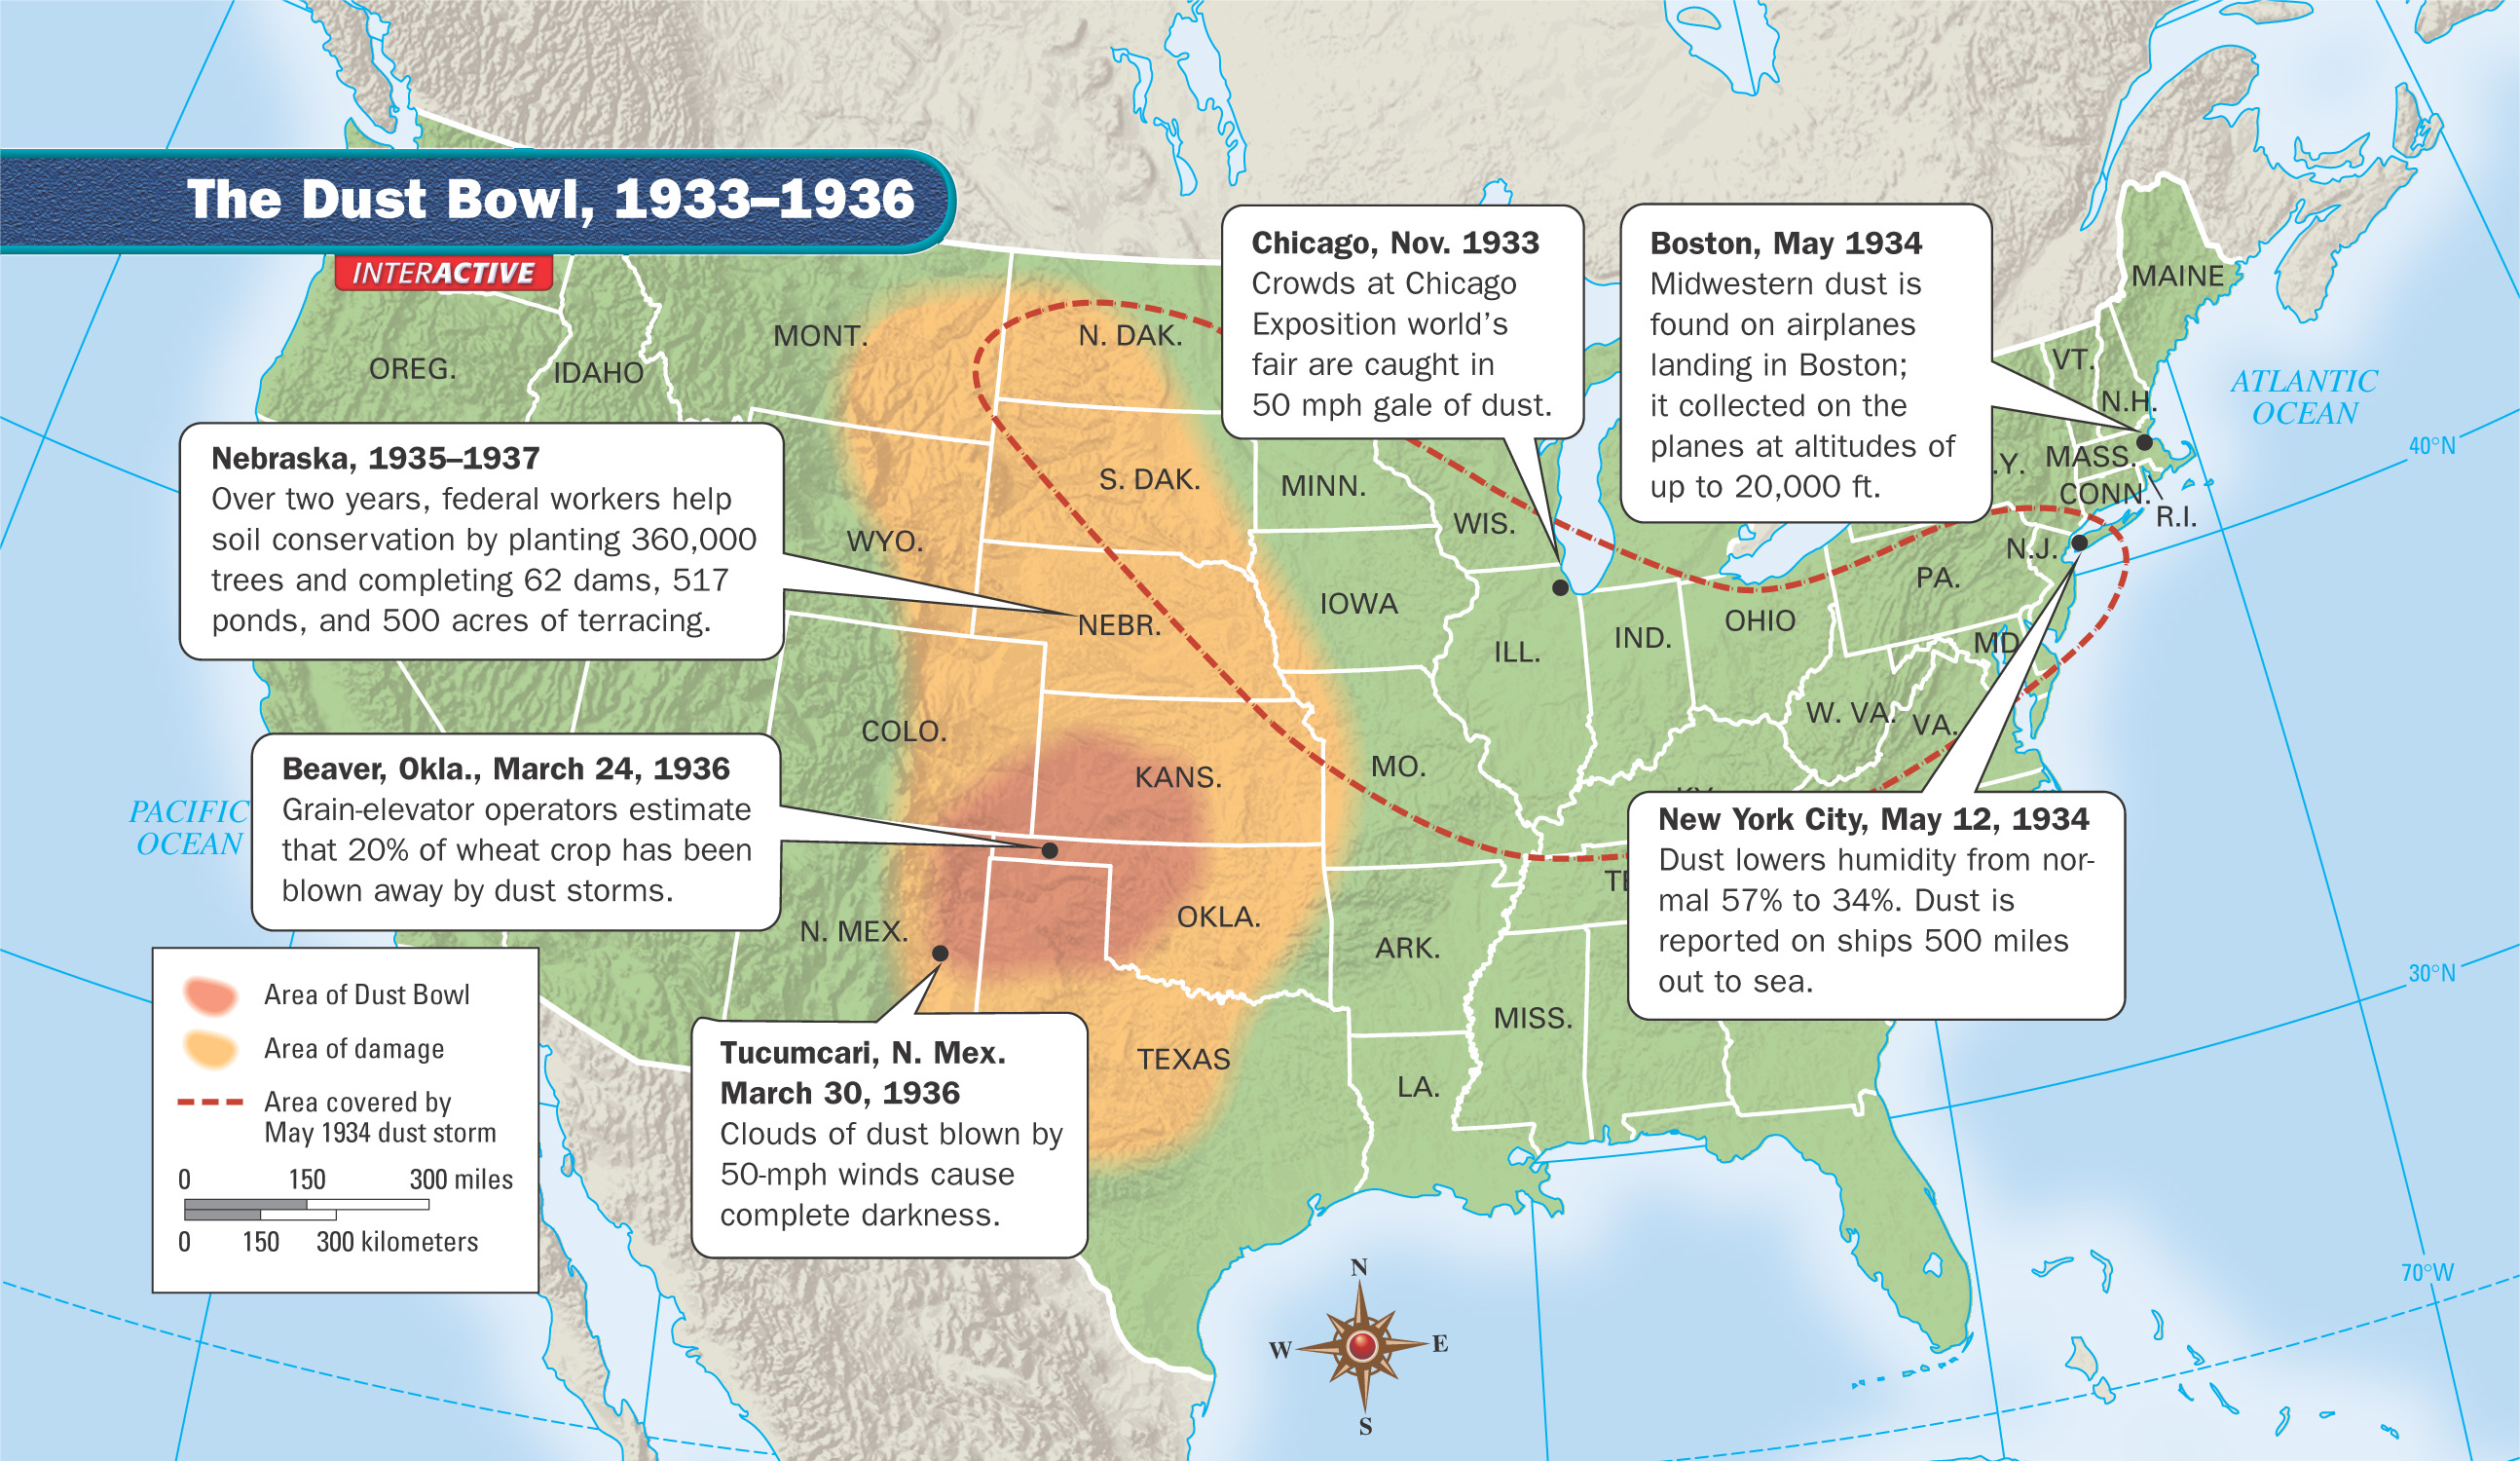 Map: The Dust Bowl 1933 - 1936